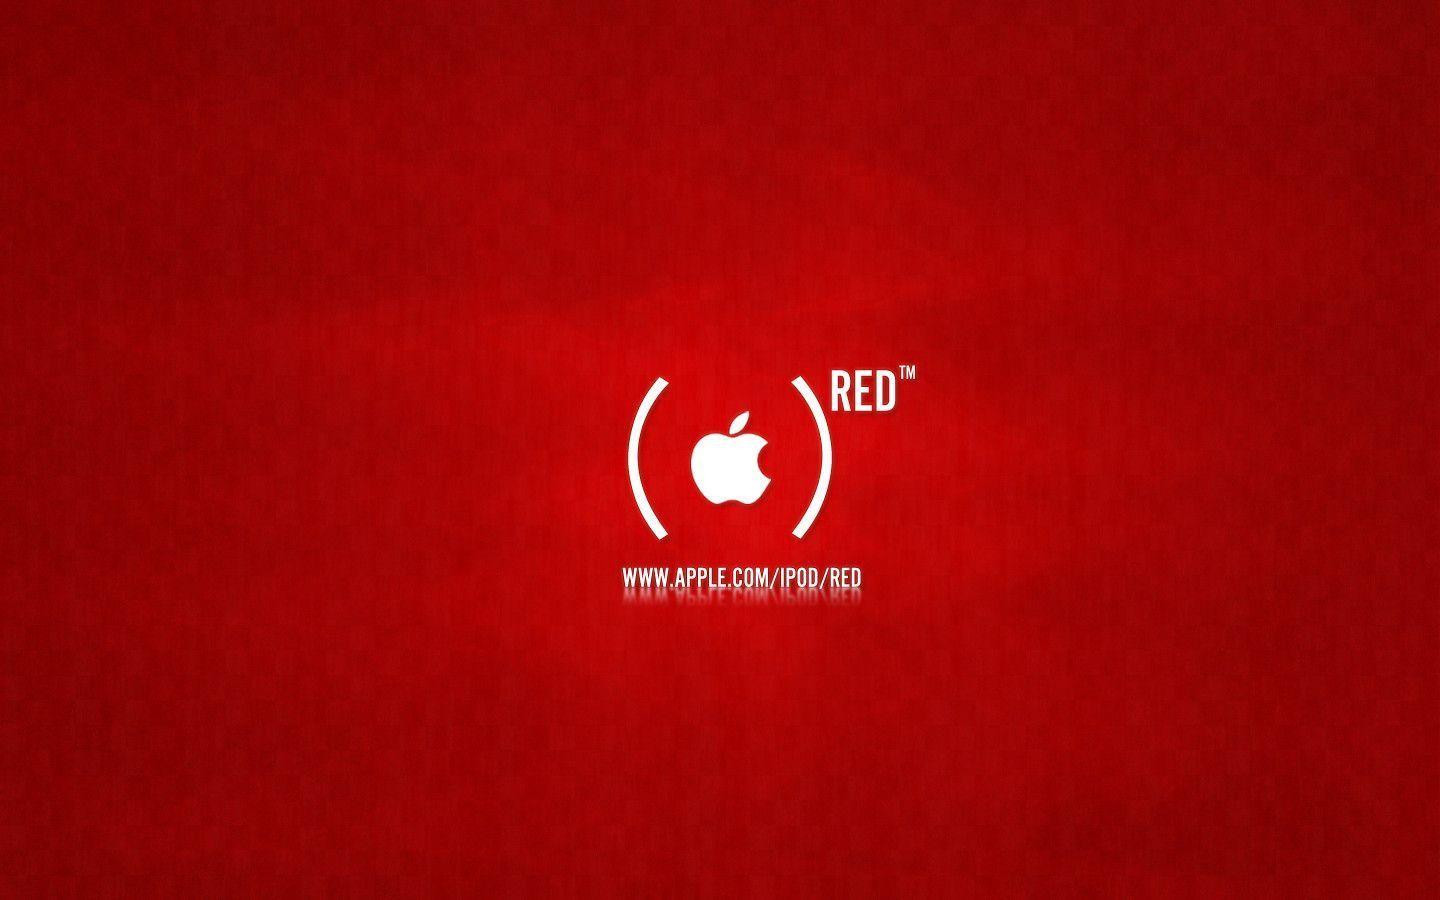 Apple Launches (RED) Campaign